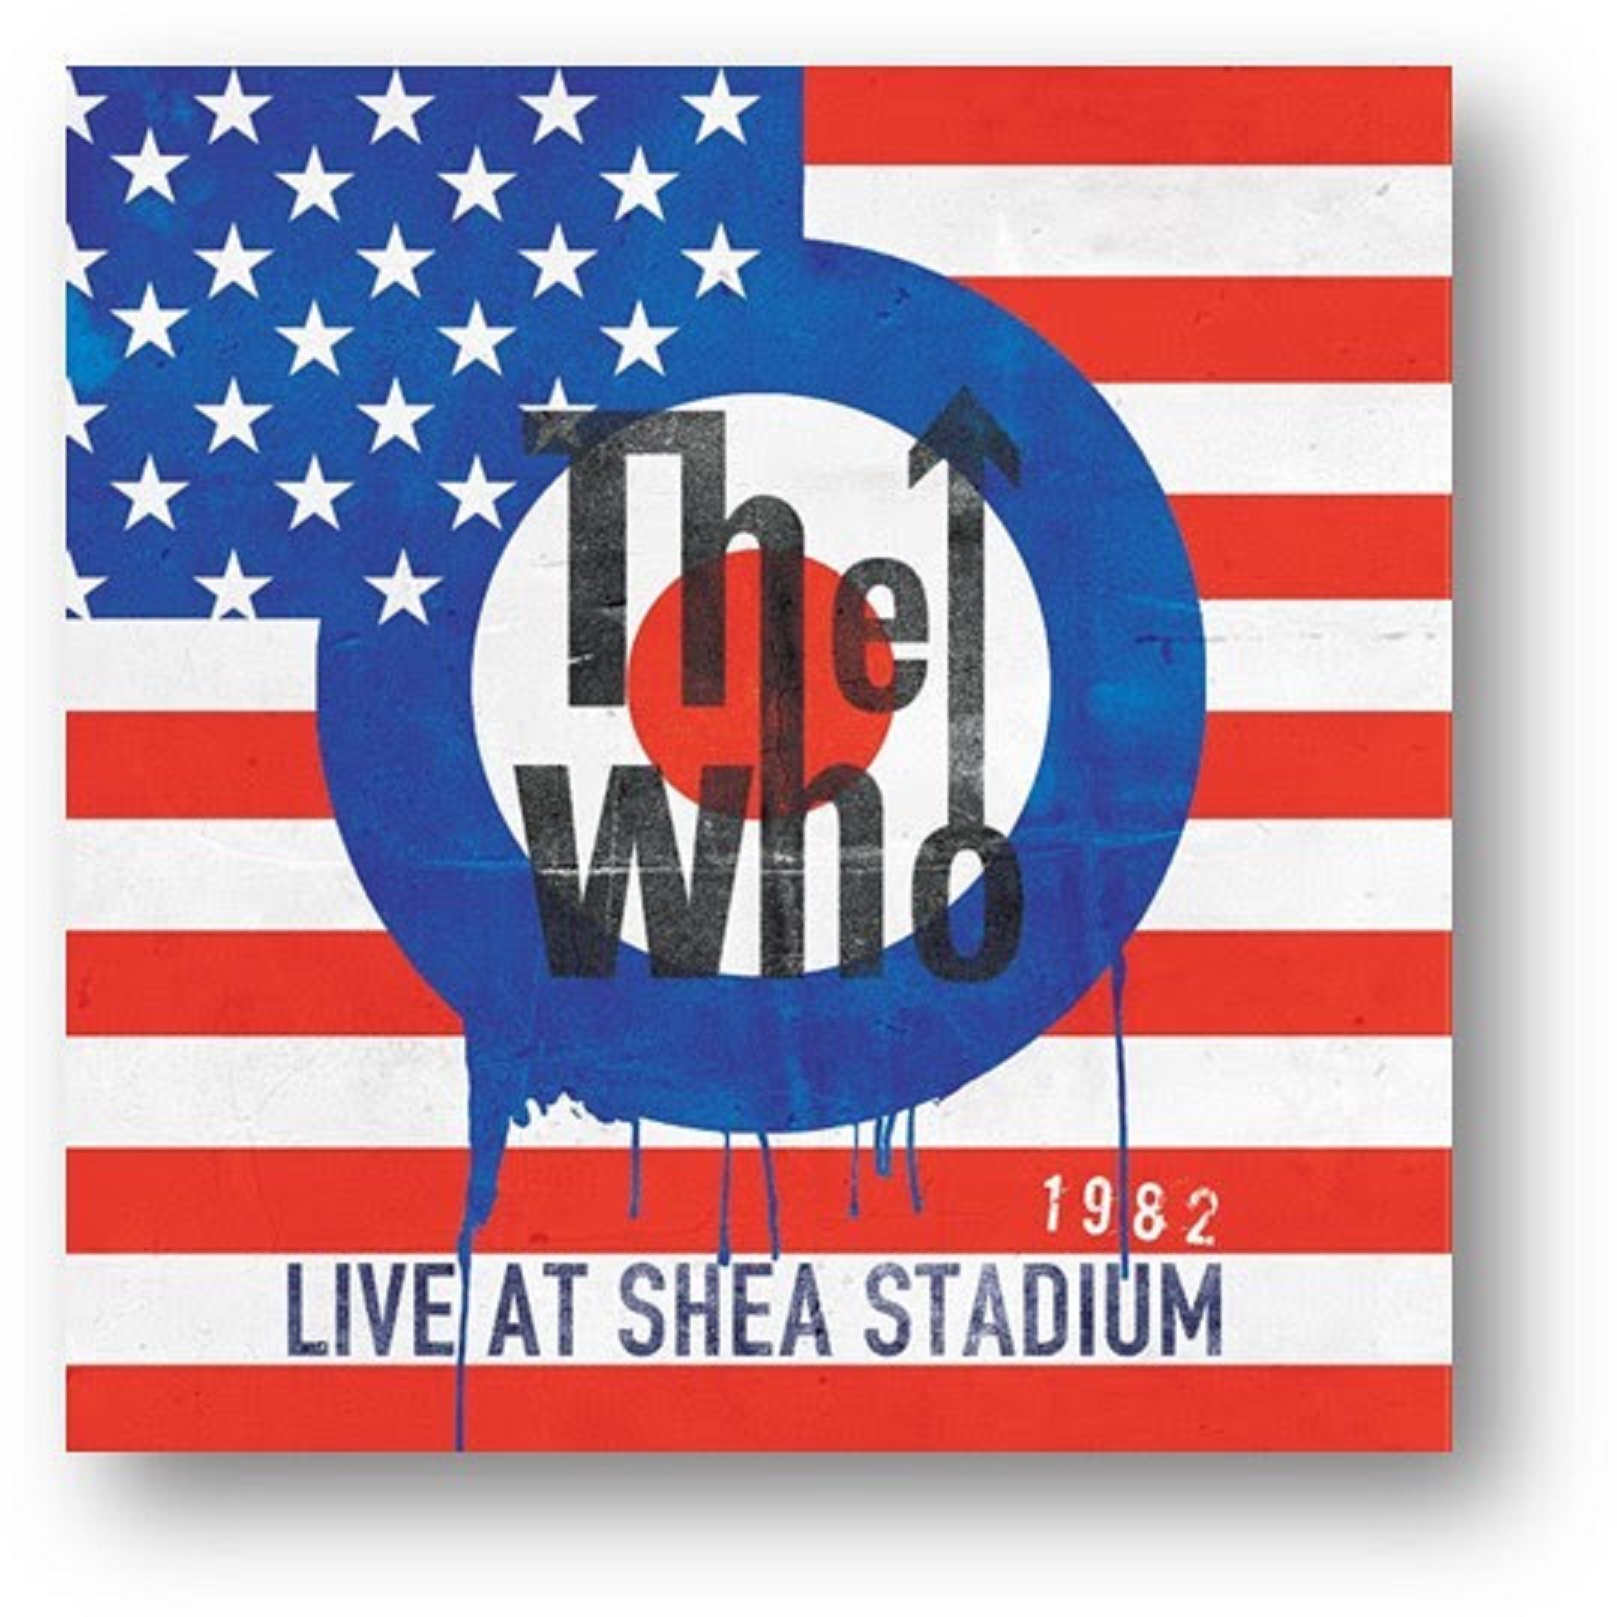 Mercury Studios Is Proud To Release THE WHO LIVE AT SHEA STADIUM 1982